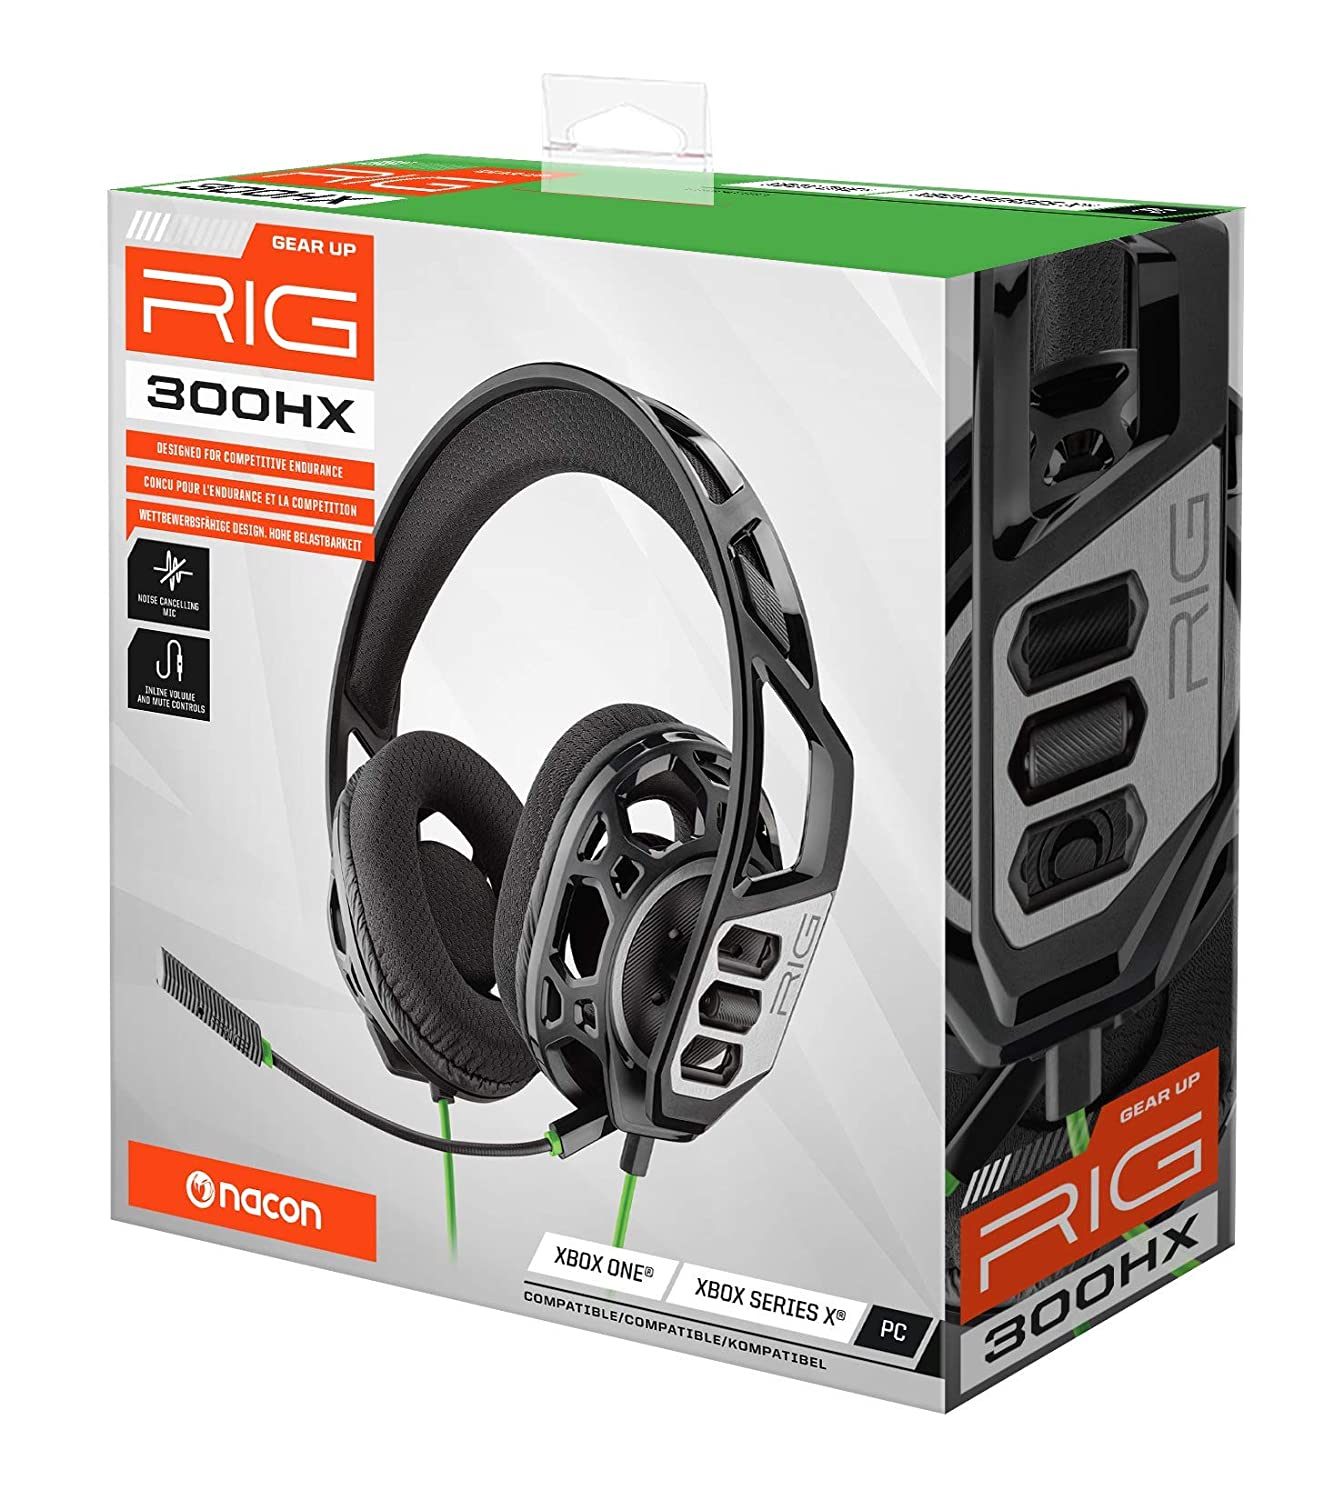 Rig300 Headset